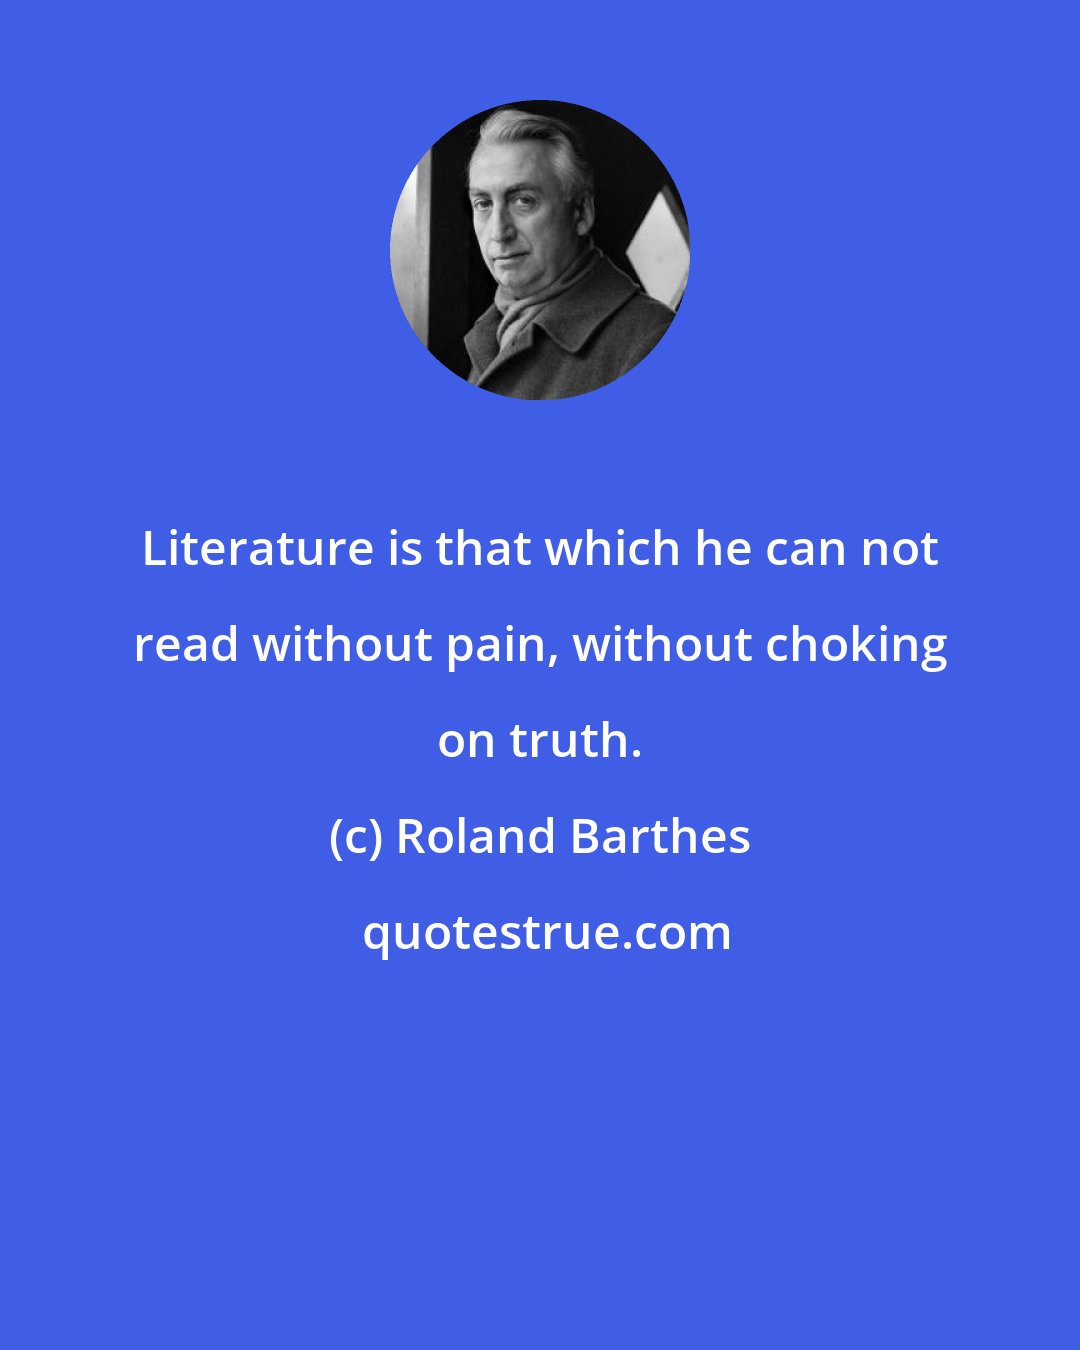 Roland Barthes: Literature is that which he can not read without pain, without choking on truth.